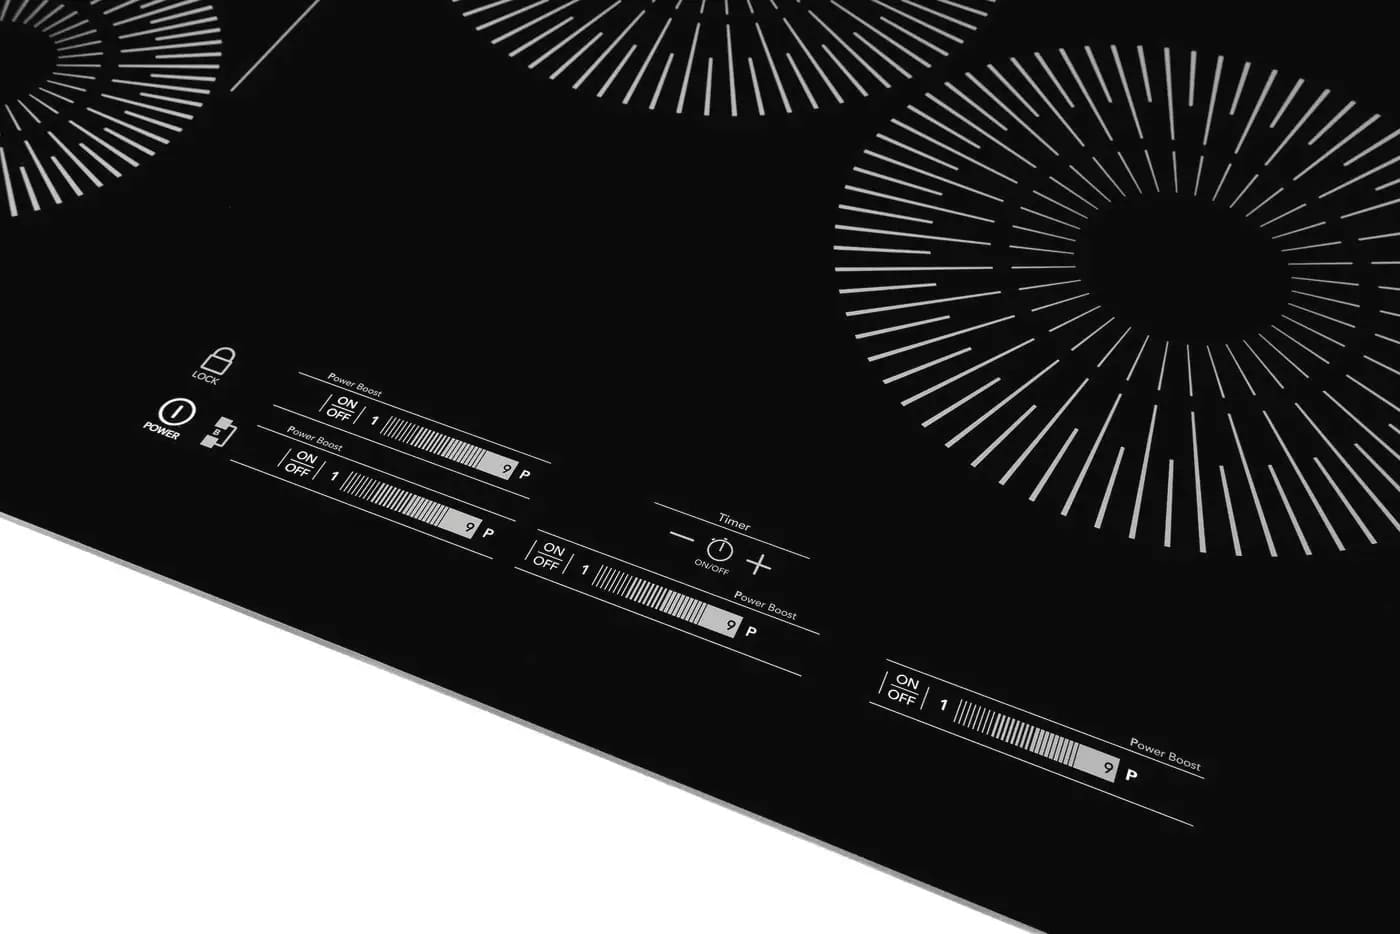 Frigidaire - 30.6 inch wide Induction Cooktop in Black Stainless - FCCI3027AB